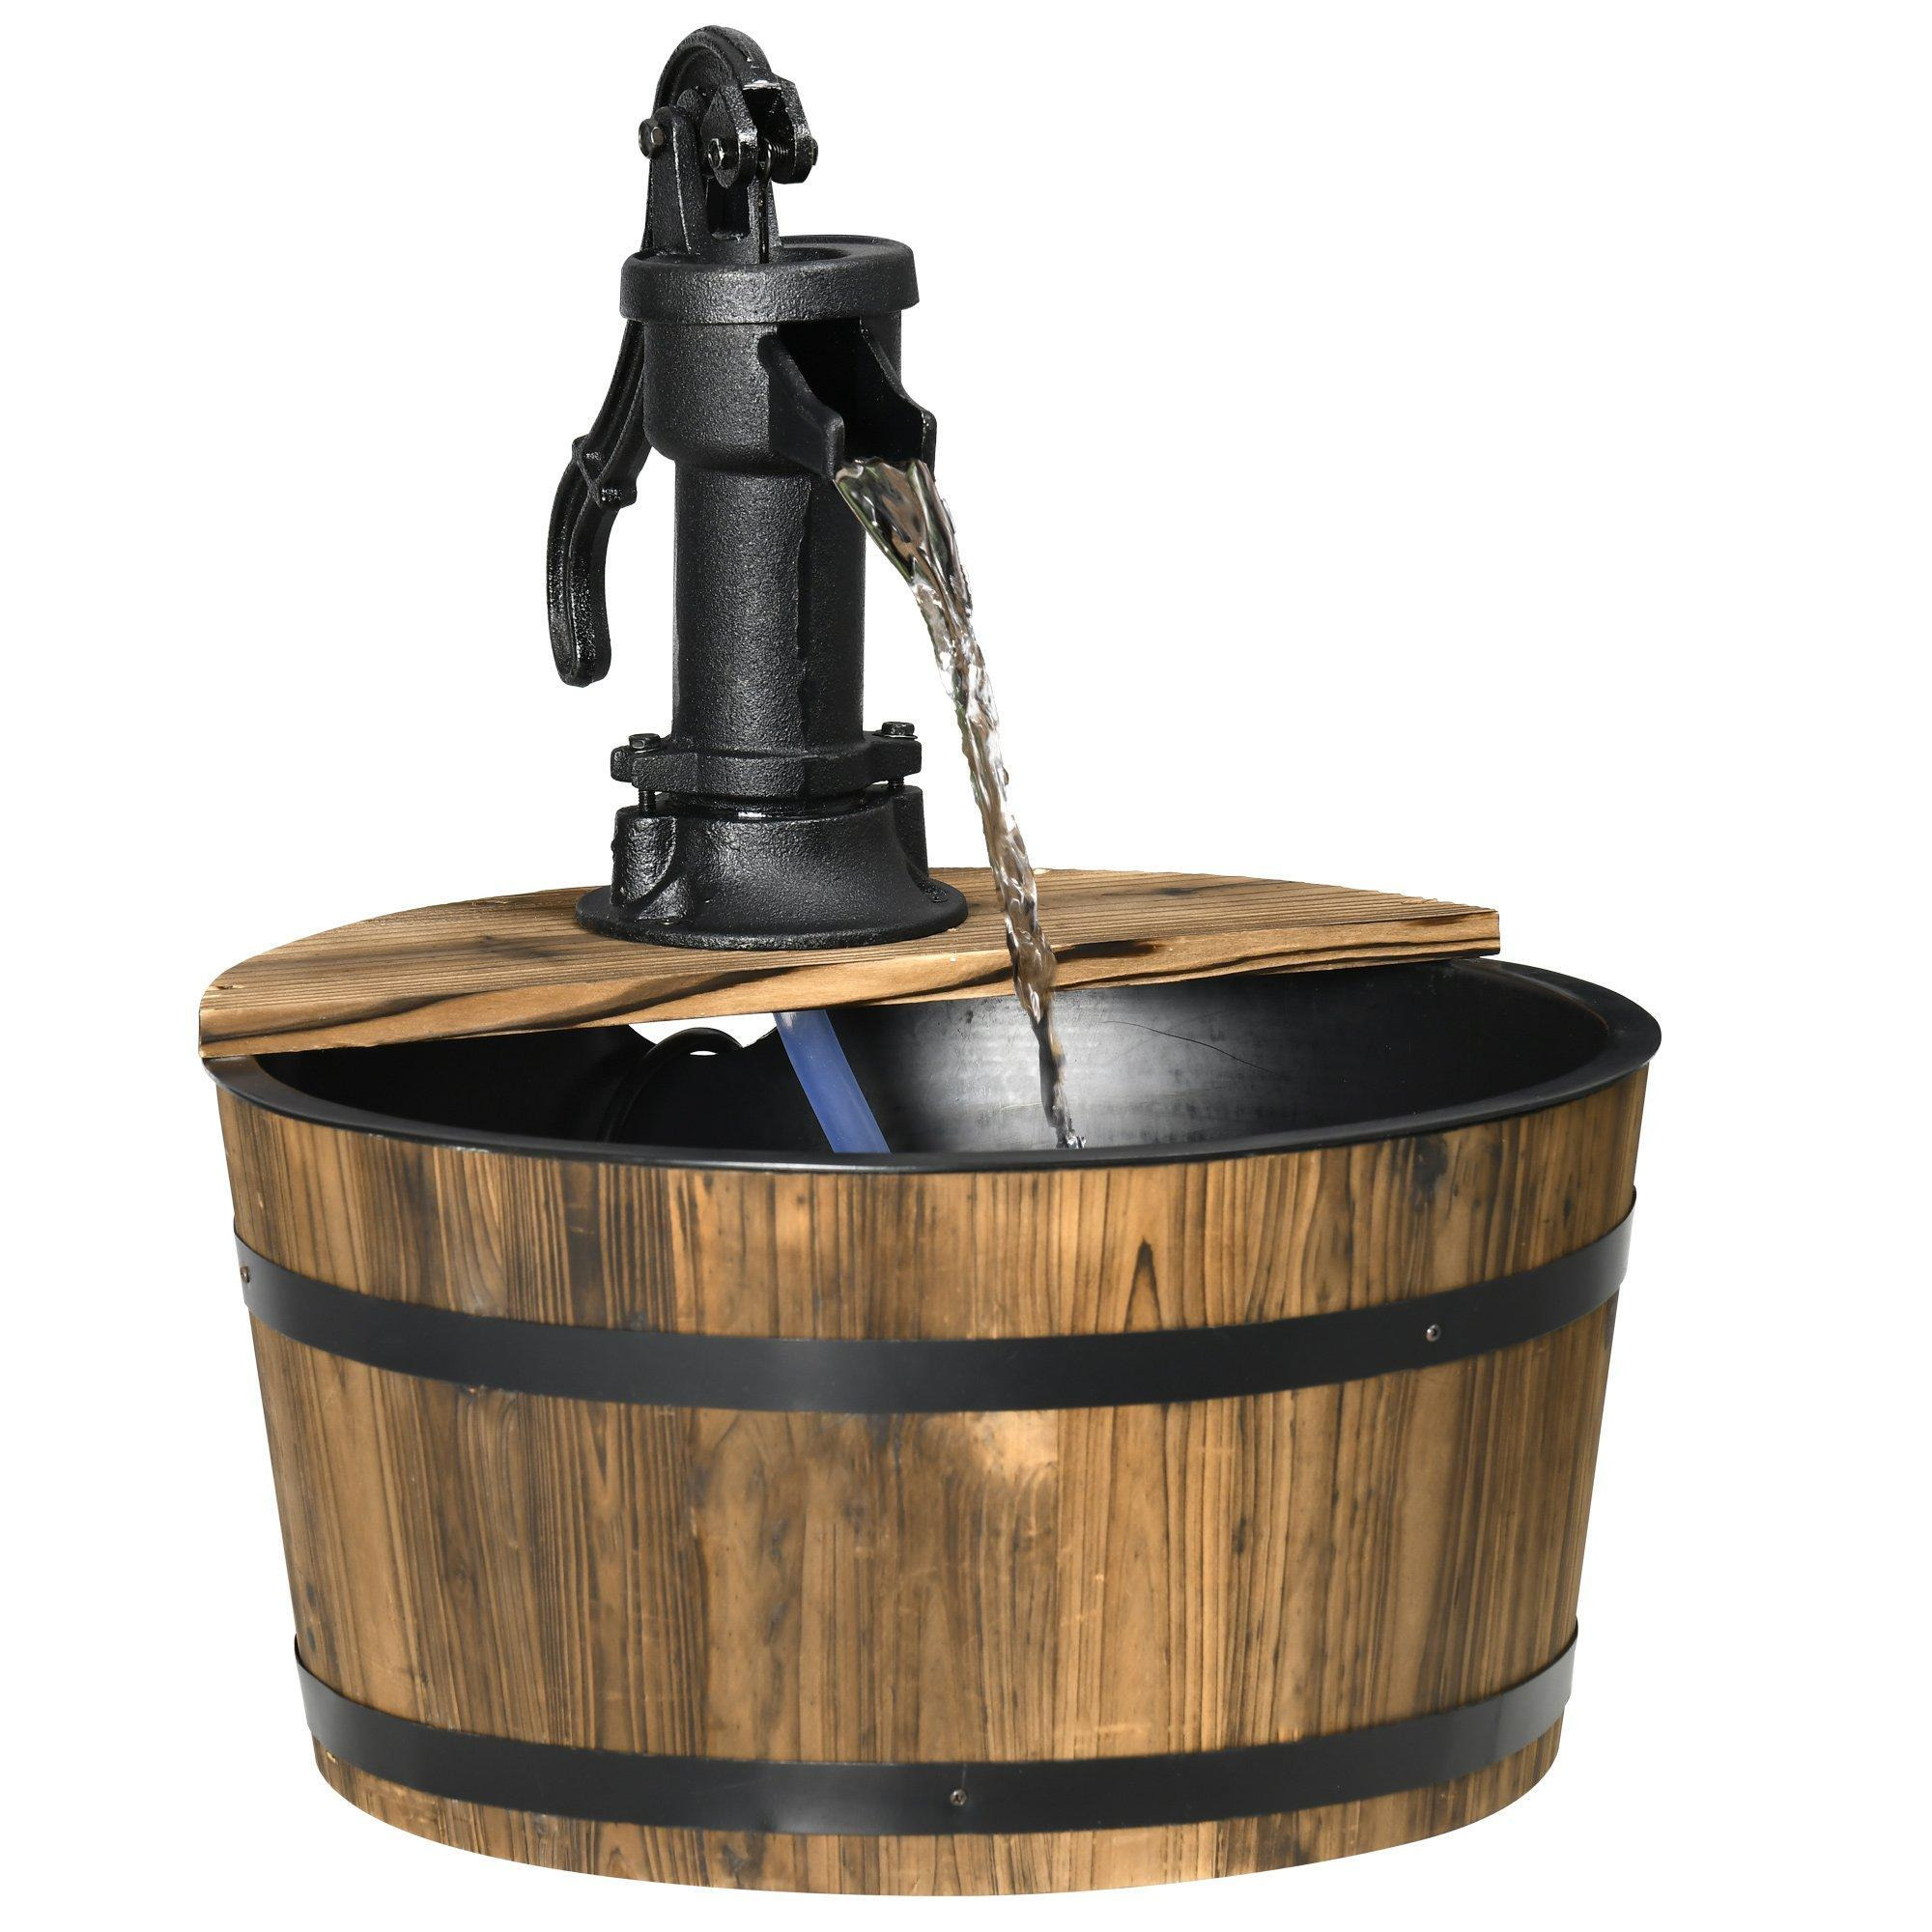 Wooden Barrel Water Fountain Garden Decorative Water Feature with Electric Pump - image 1